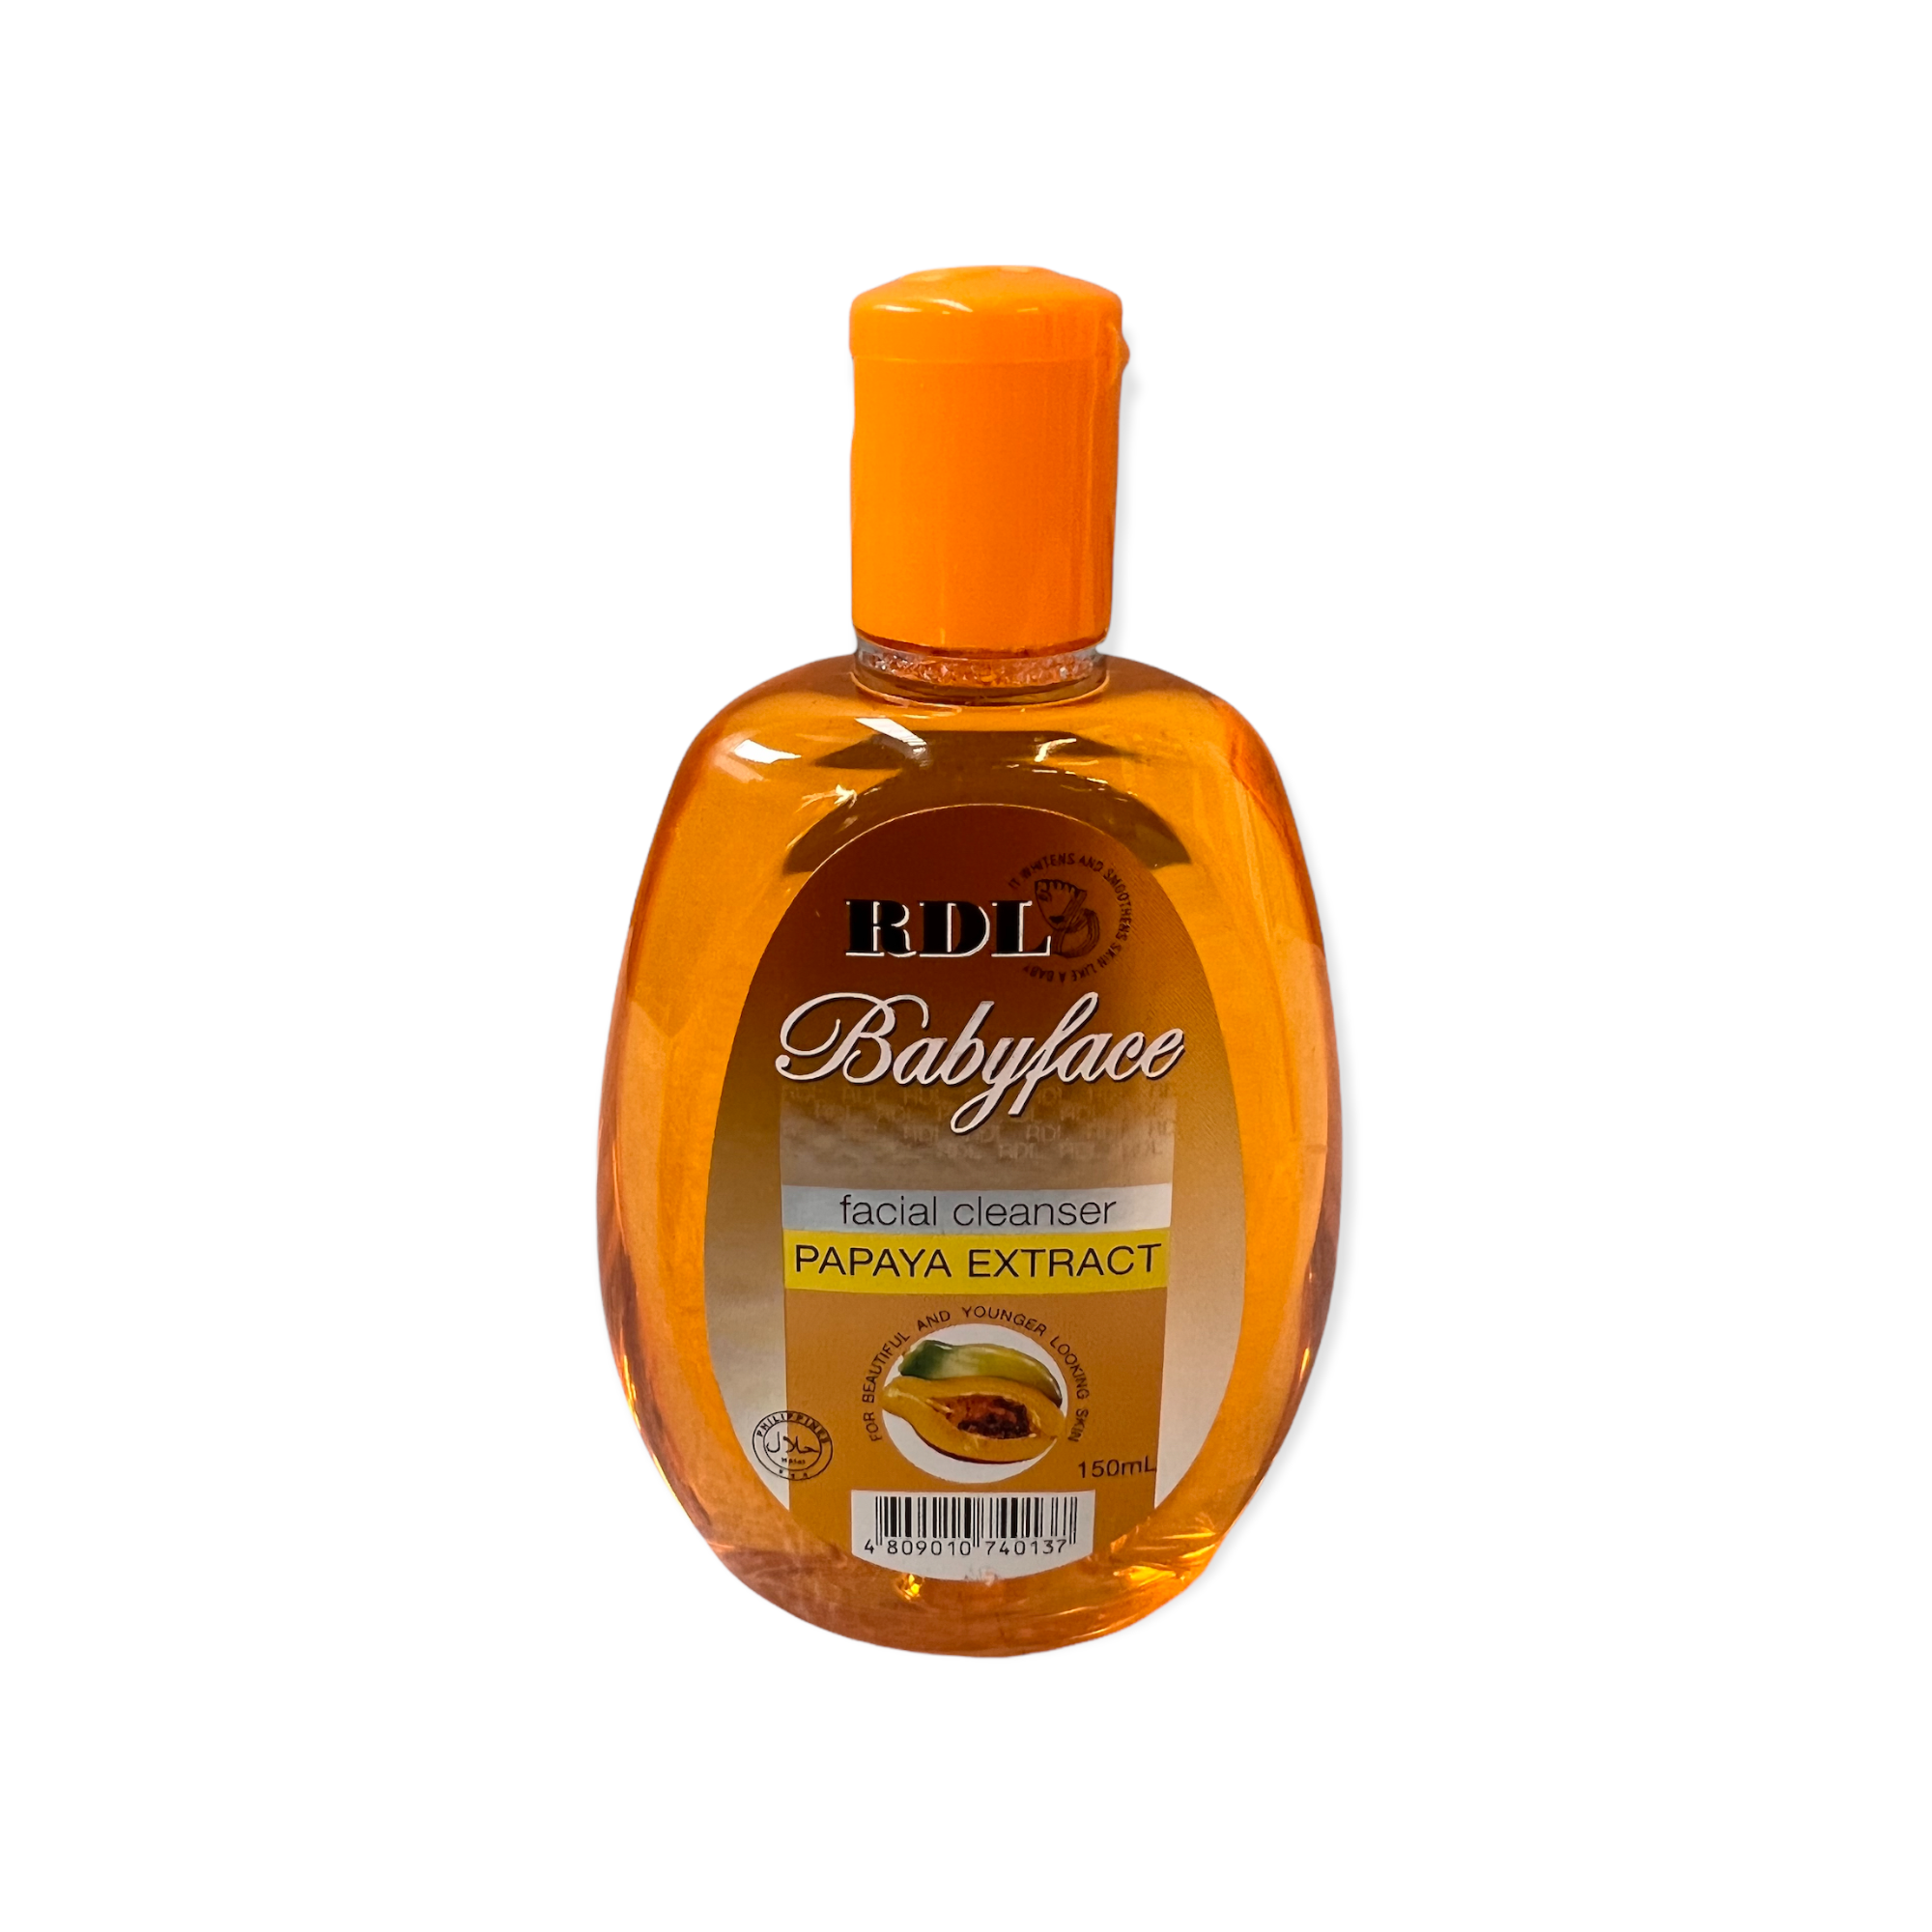 RDL Baby Face Papaya Extract Facial Cleanser 150ml